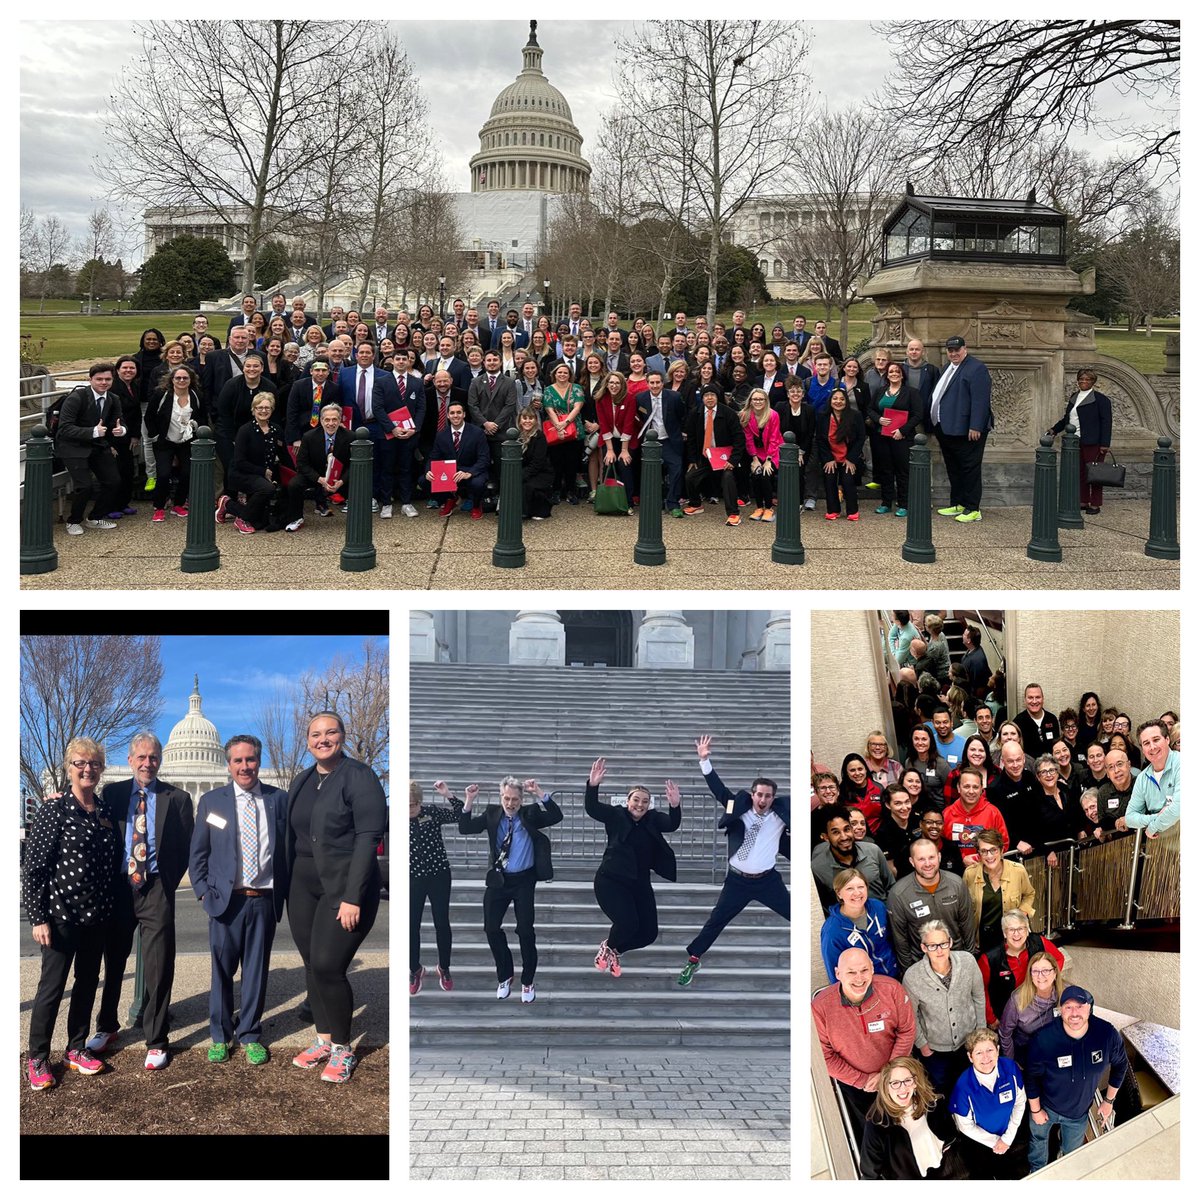 @SHAPE_America #WhatMadeYourWeek Advocating with Team Illinois for more funding and support for #Physed #HealthEd #MoreTitleIV #SpeakOutDay #SHAPEAdvocacy @foes4sports @CoachFoe @SHAPE_America @IAHPERD